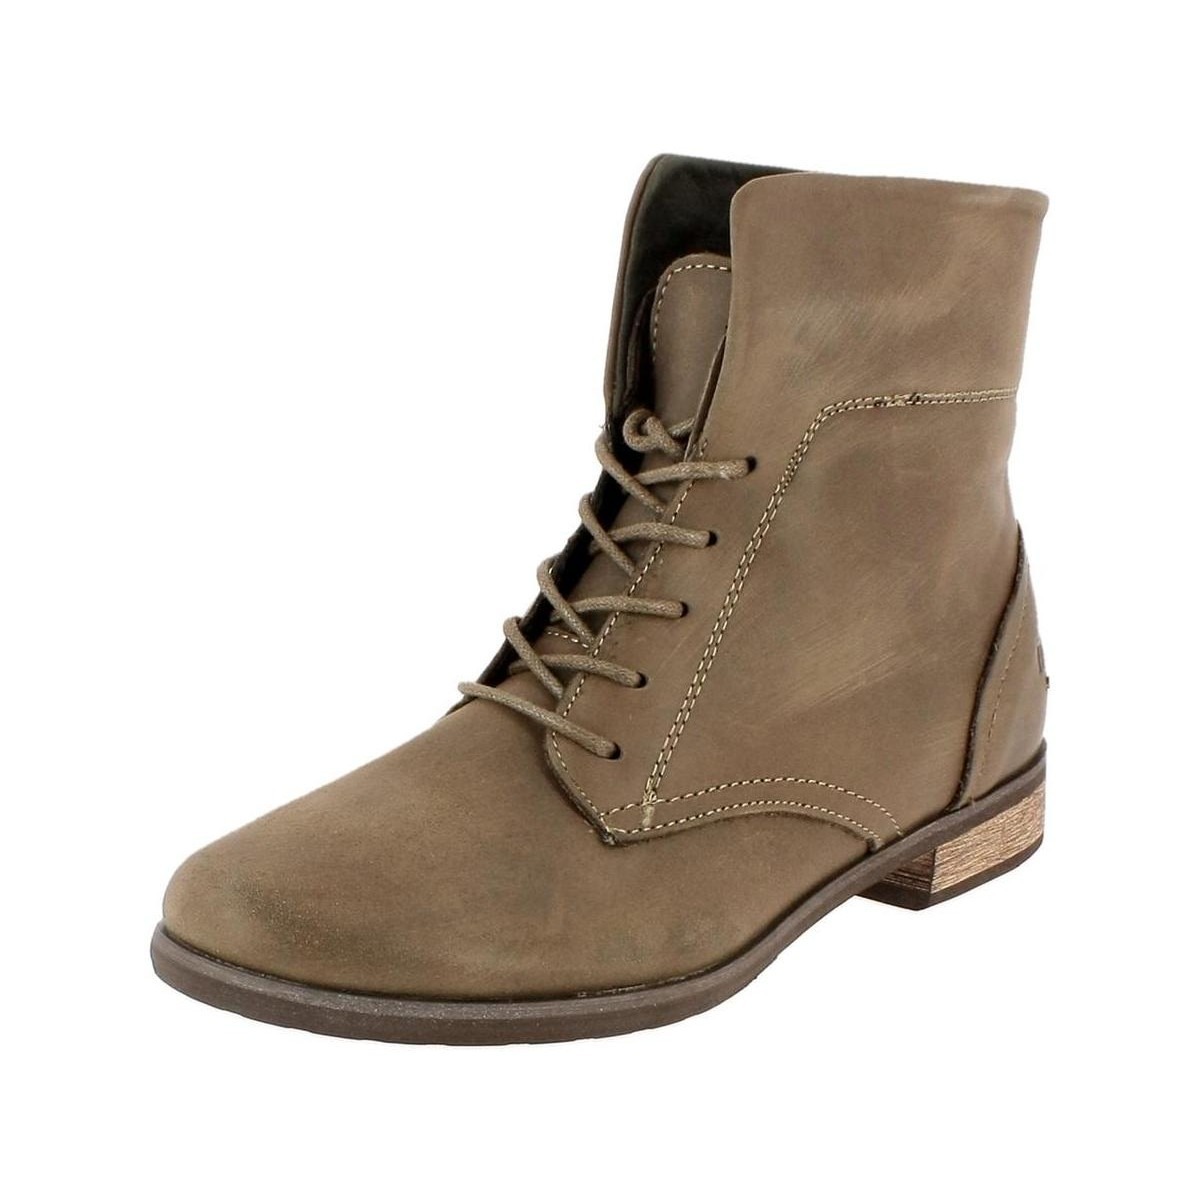 Mtng - Beige - Women Ankle Boots - Spartoo GOOFASH